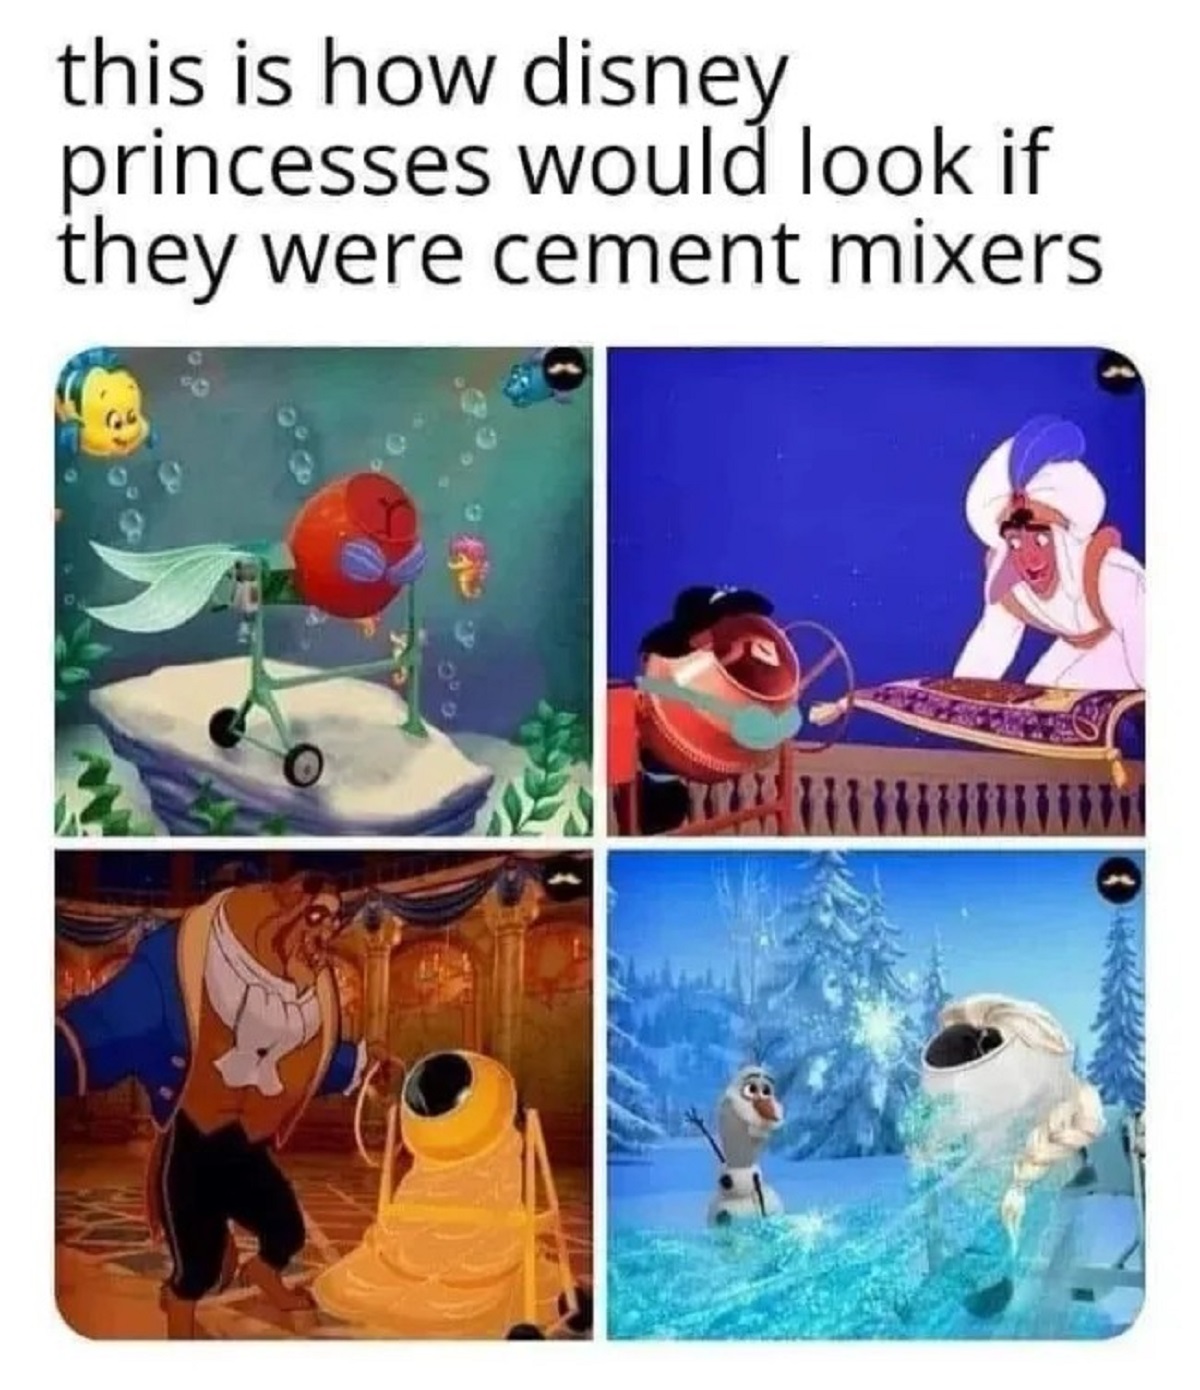 planet ocean world - this is how disney princesses would look if they were cement mixers